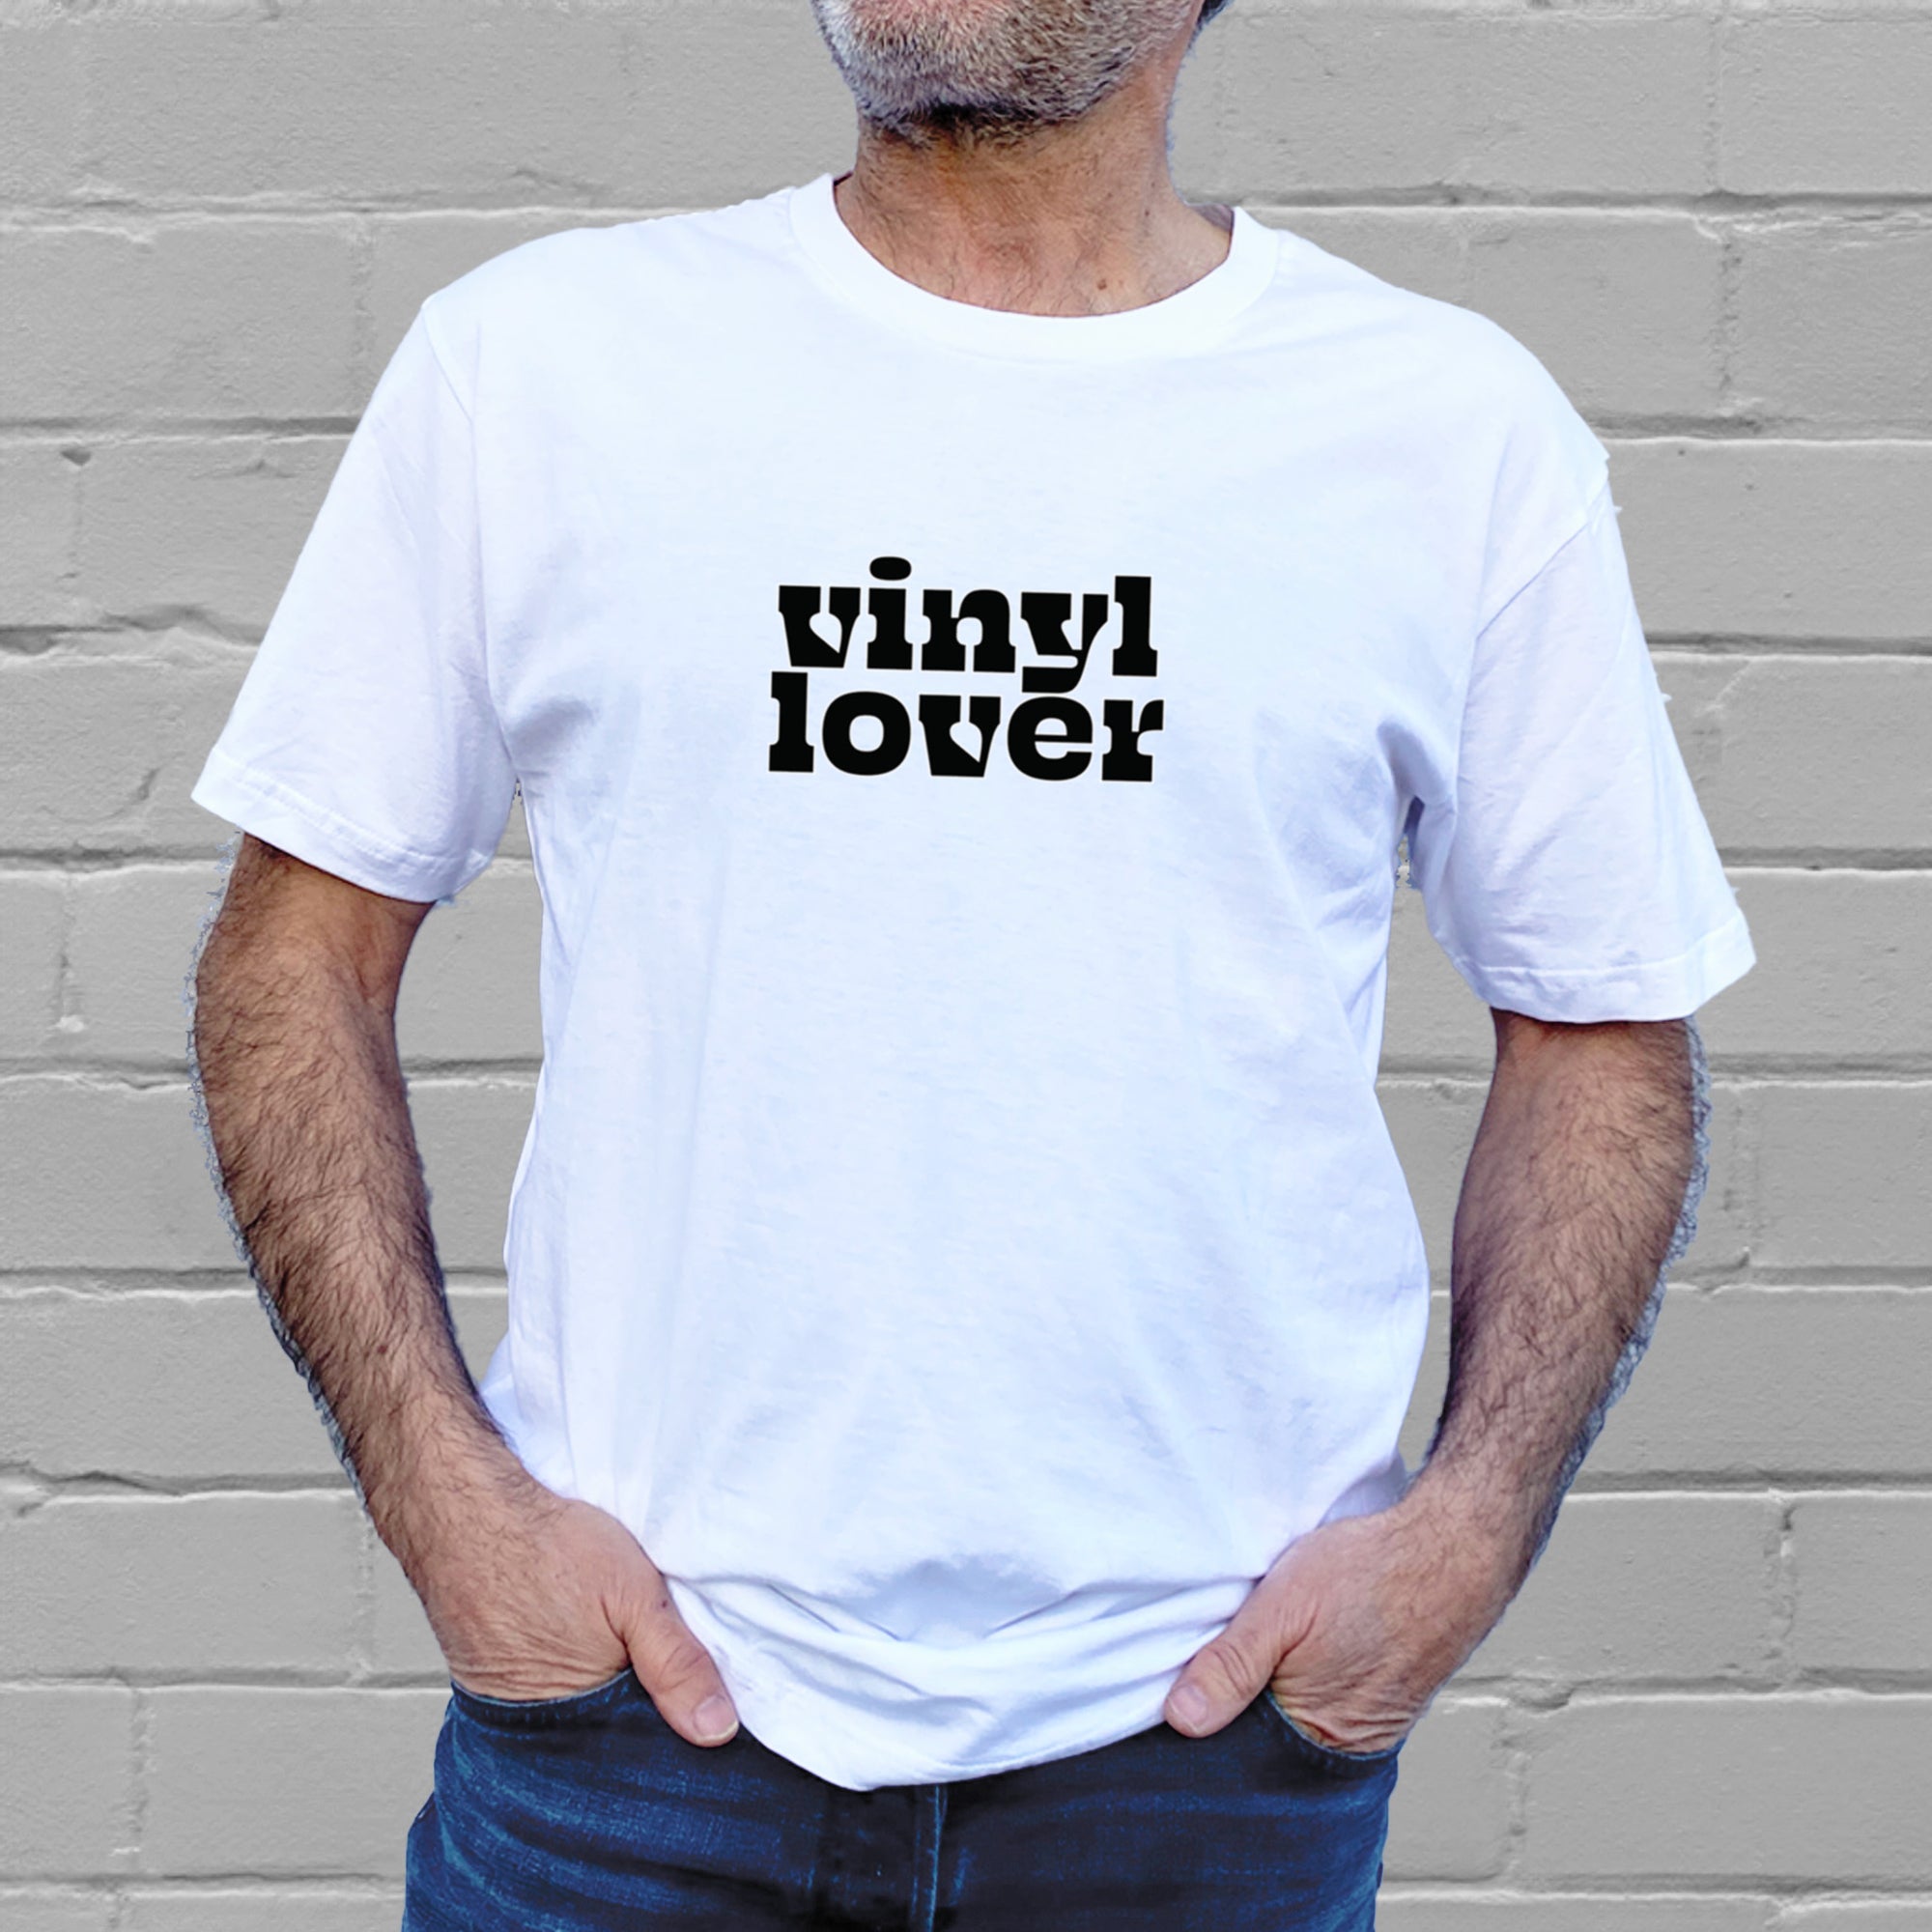 I'm With The Band® Vinyl Lover T-shirt with bright multi-colour print on white T being worn by a faceless man standing against a white painted brick wall